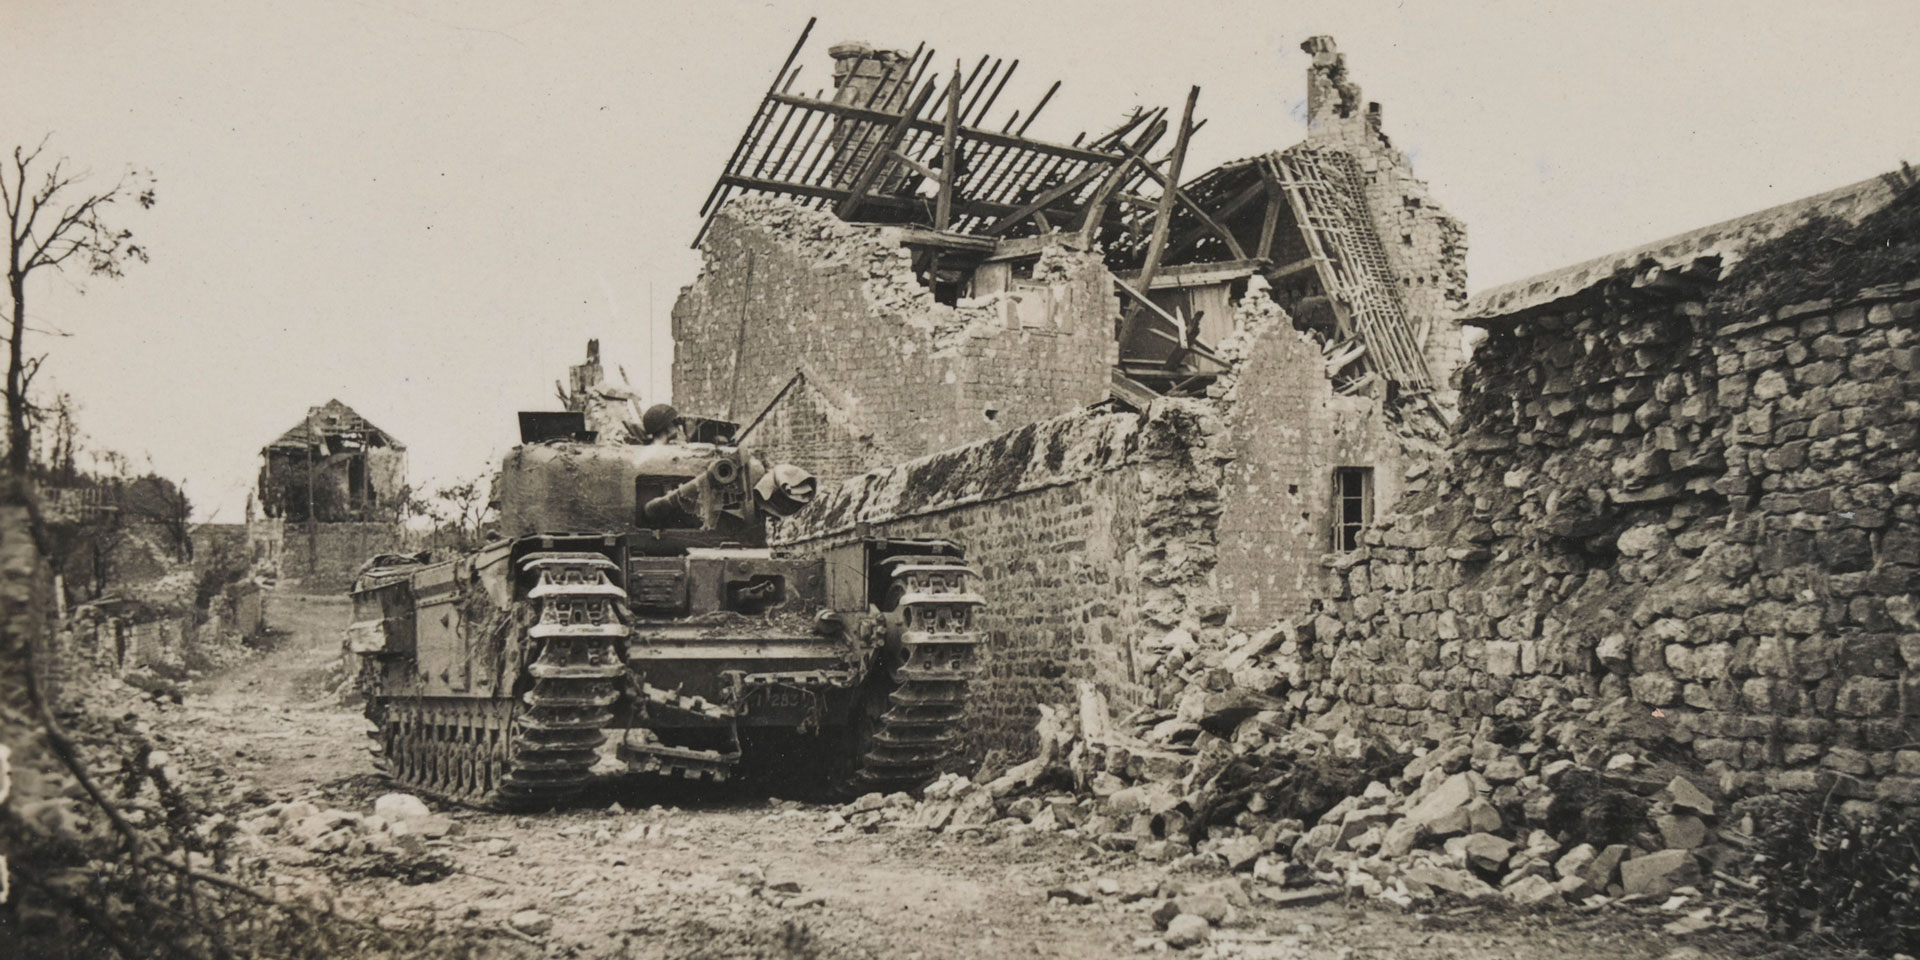 A Churchill tank in a ruined Normandy village, July 1944